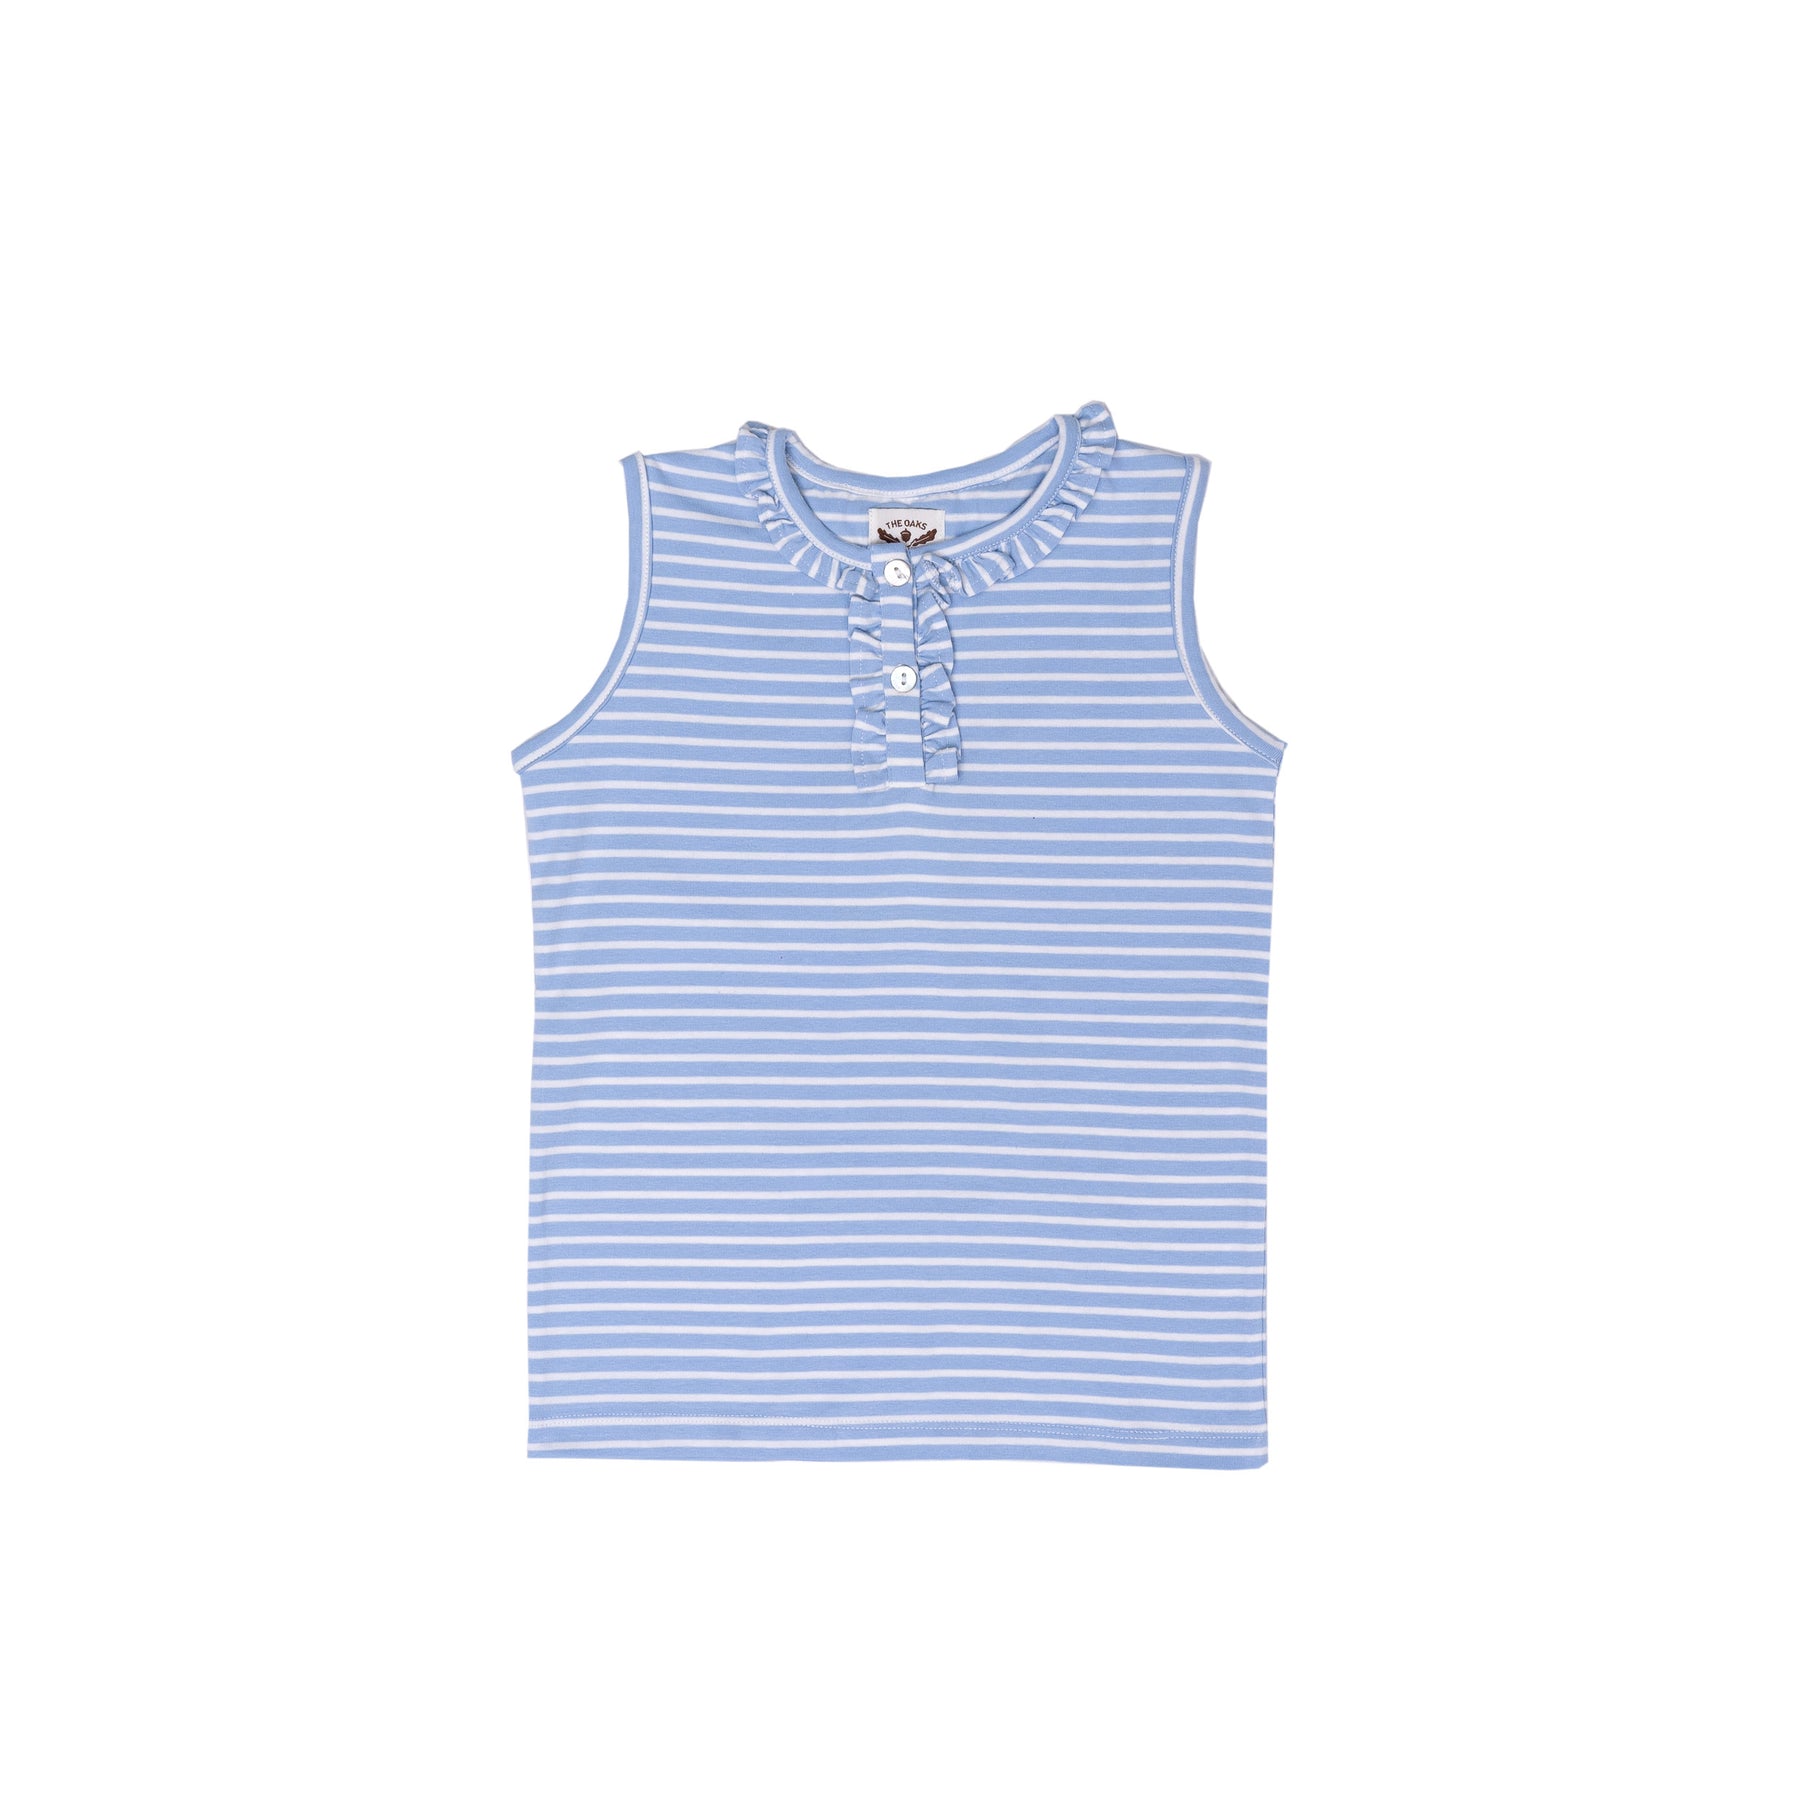 Lucy Blue and White Striped Shirt – The Oaks Apparel Co.